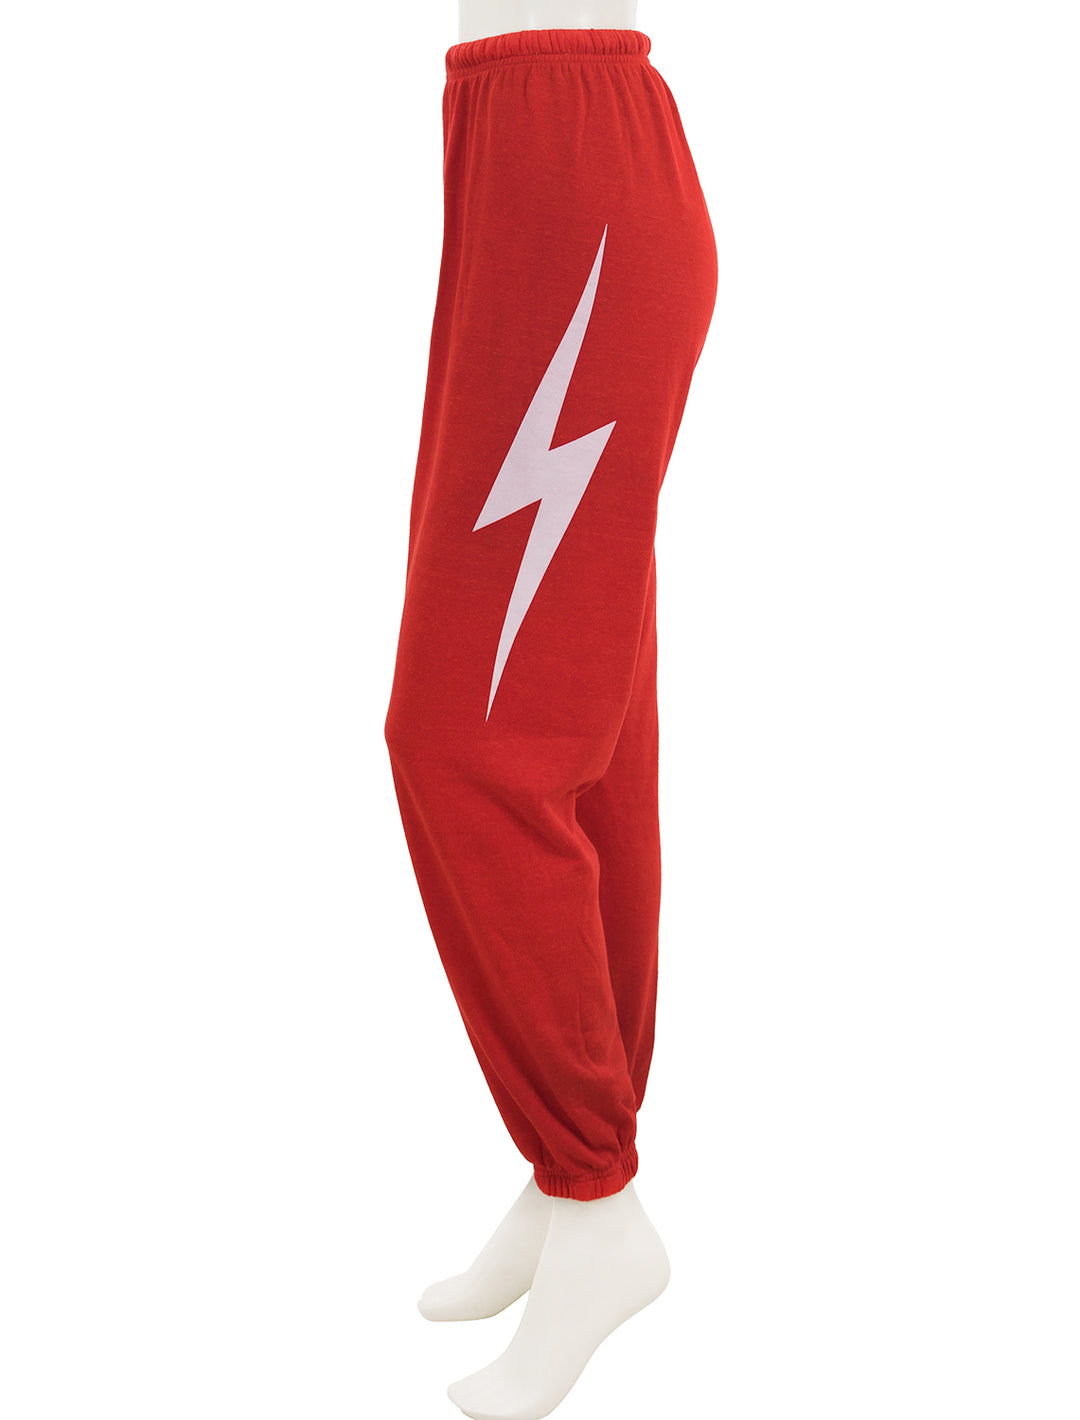 Side view of Aviator Nation's bolt - womens sweatpants in red and white.